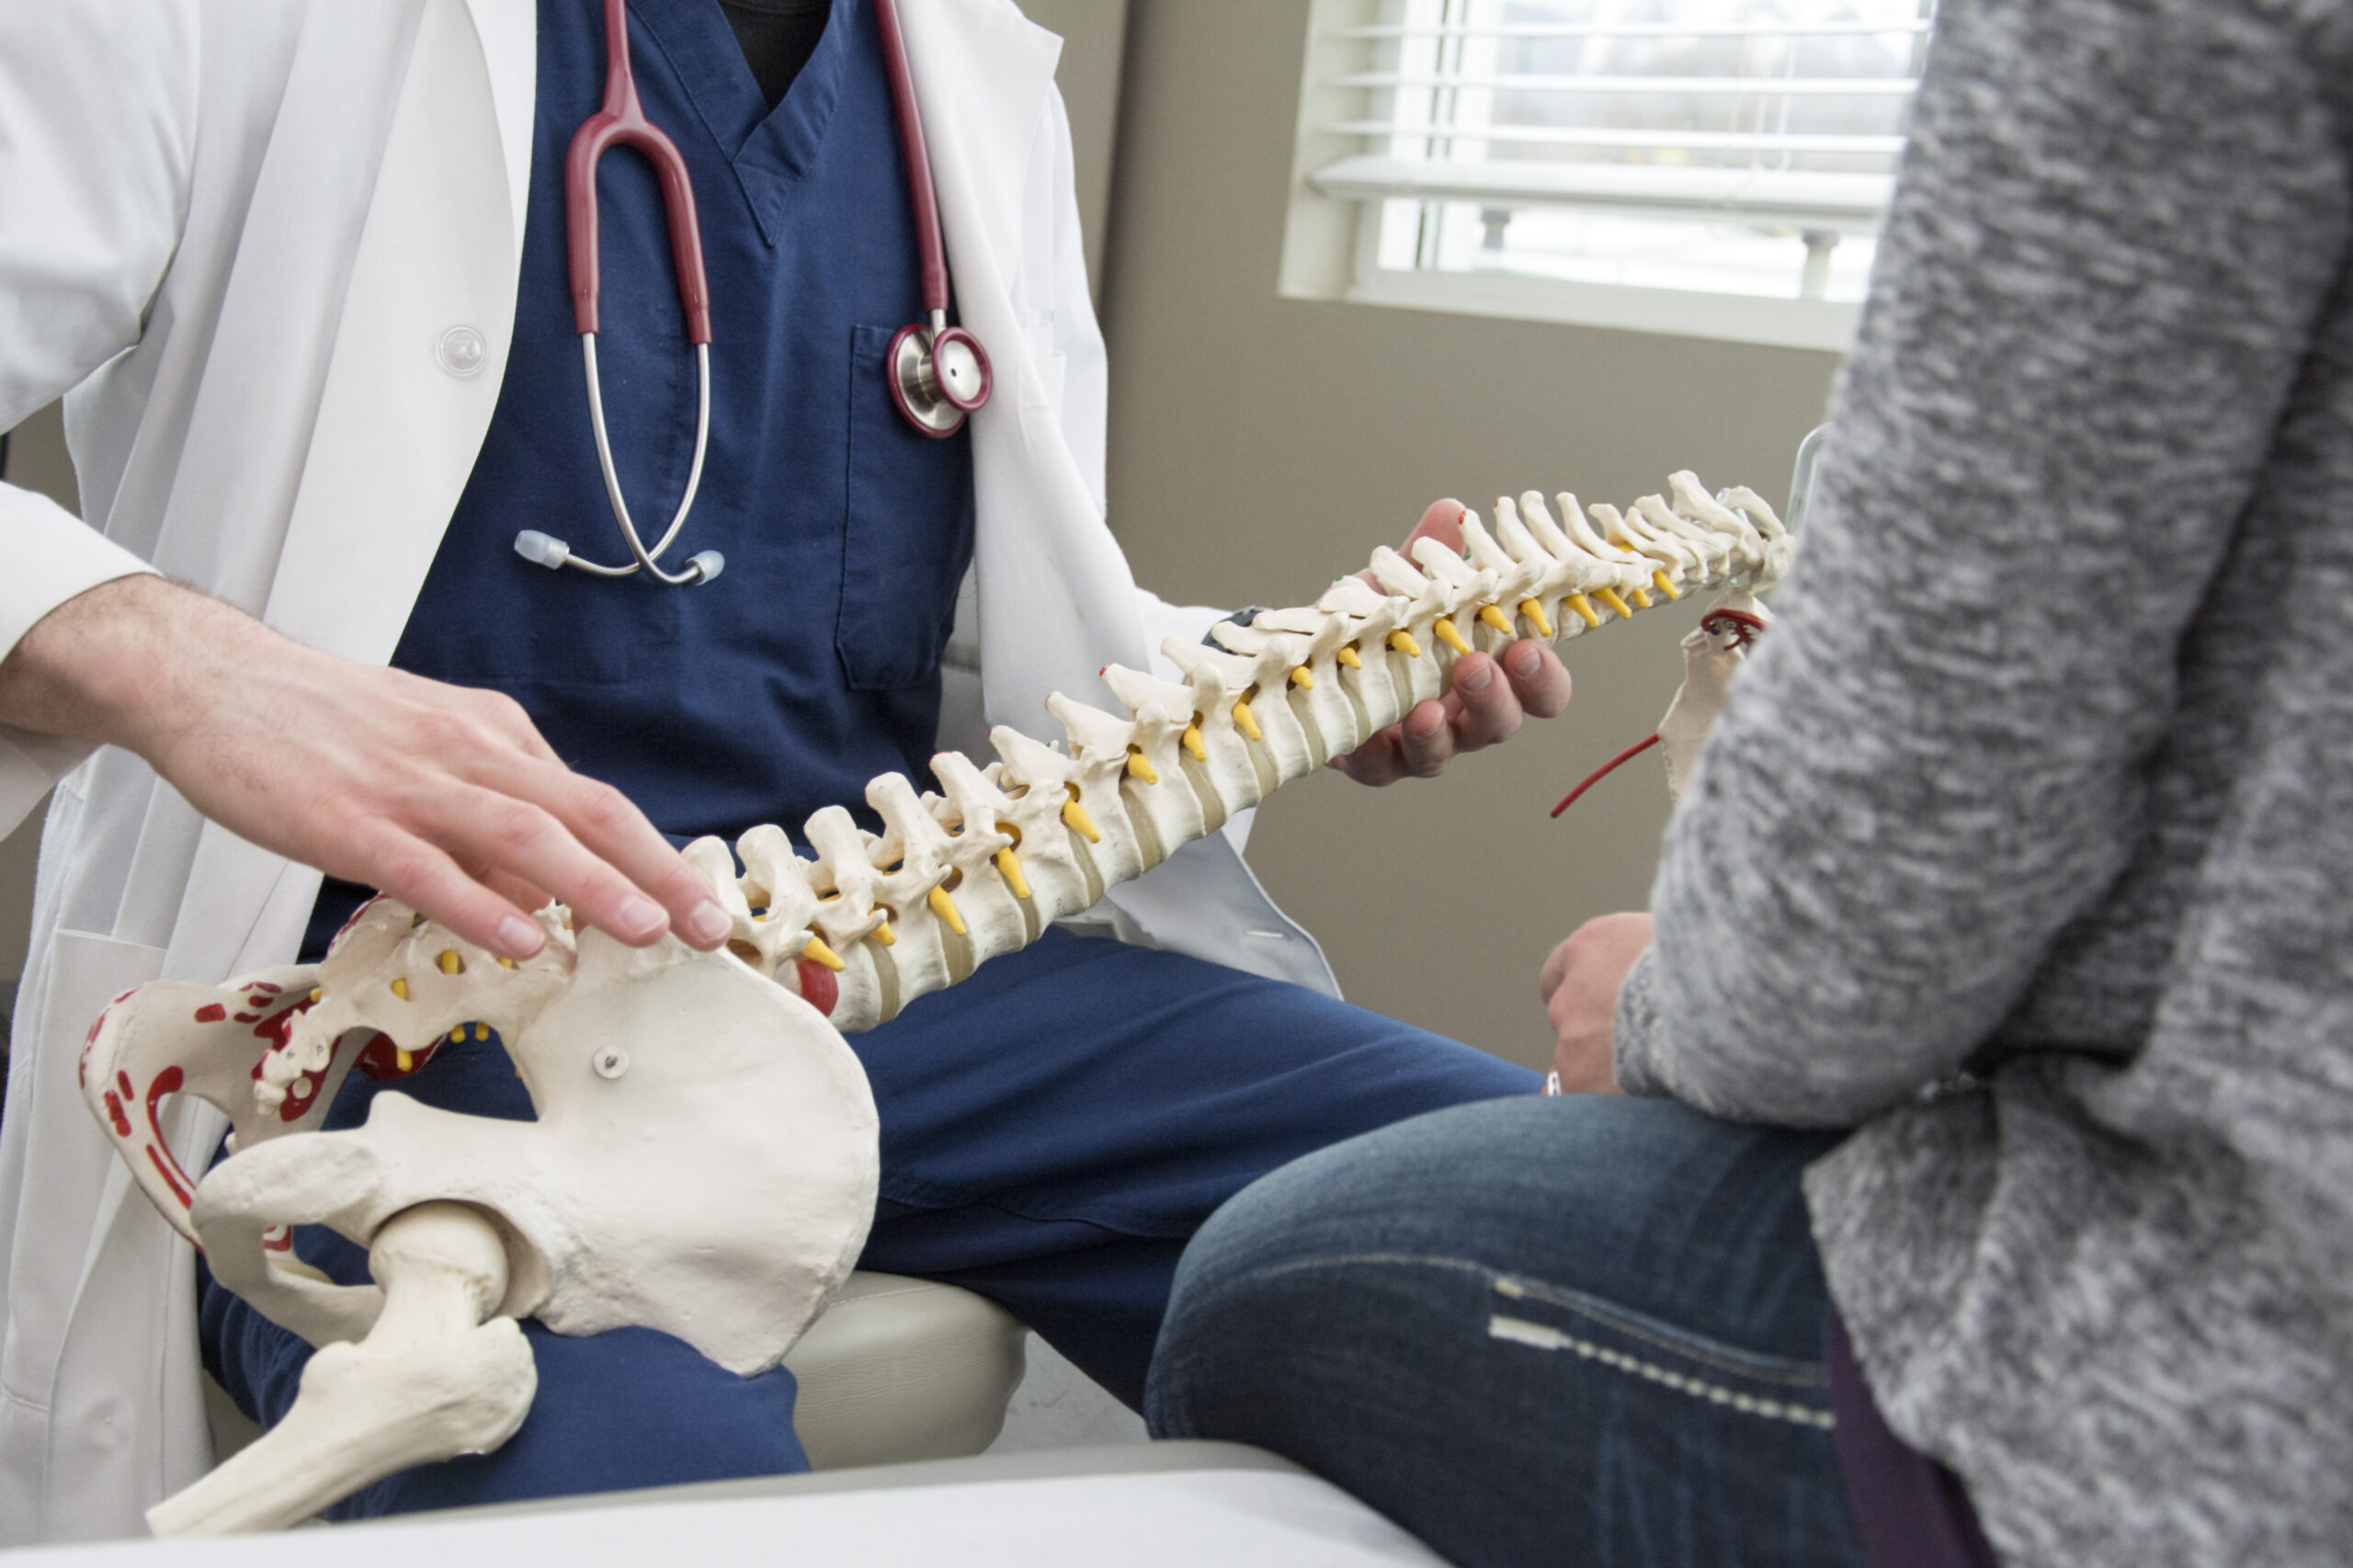 A spine doctor discussing holistic solutions for living with back pain with a patient in his office, using a model of the spine.